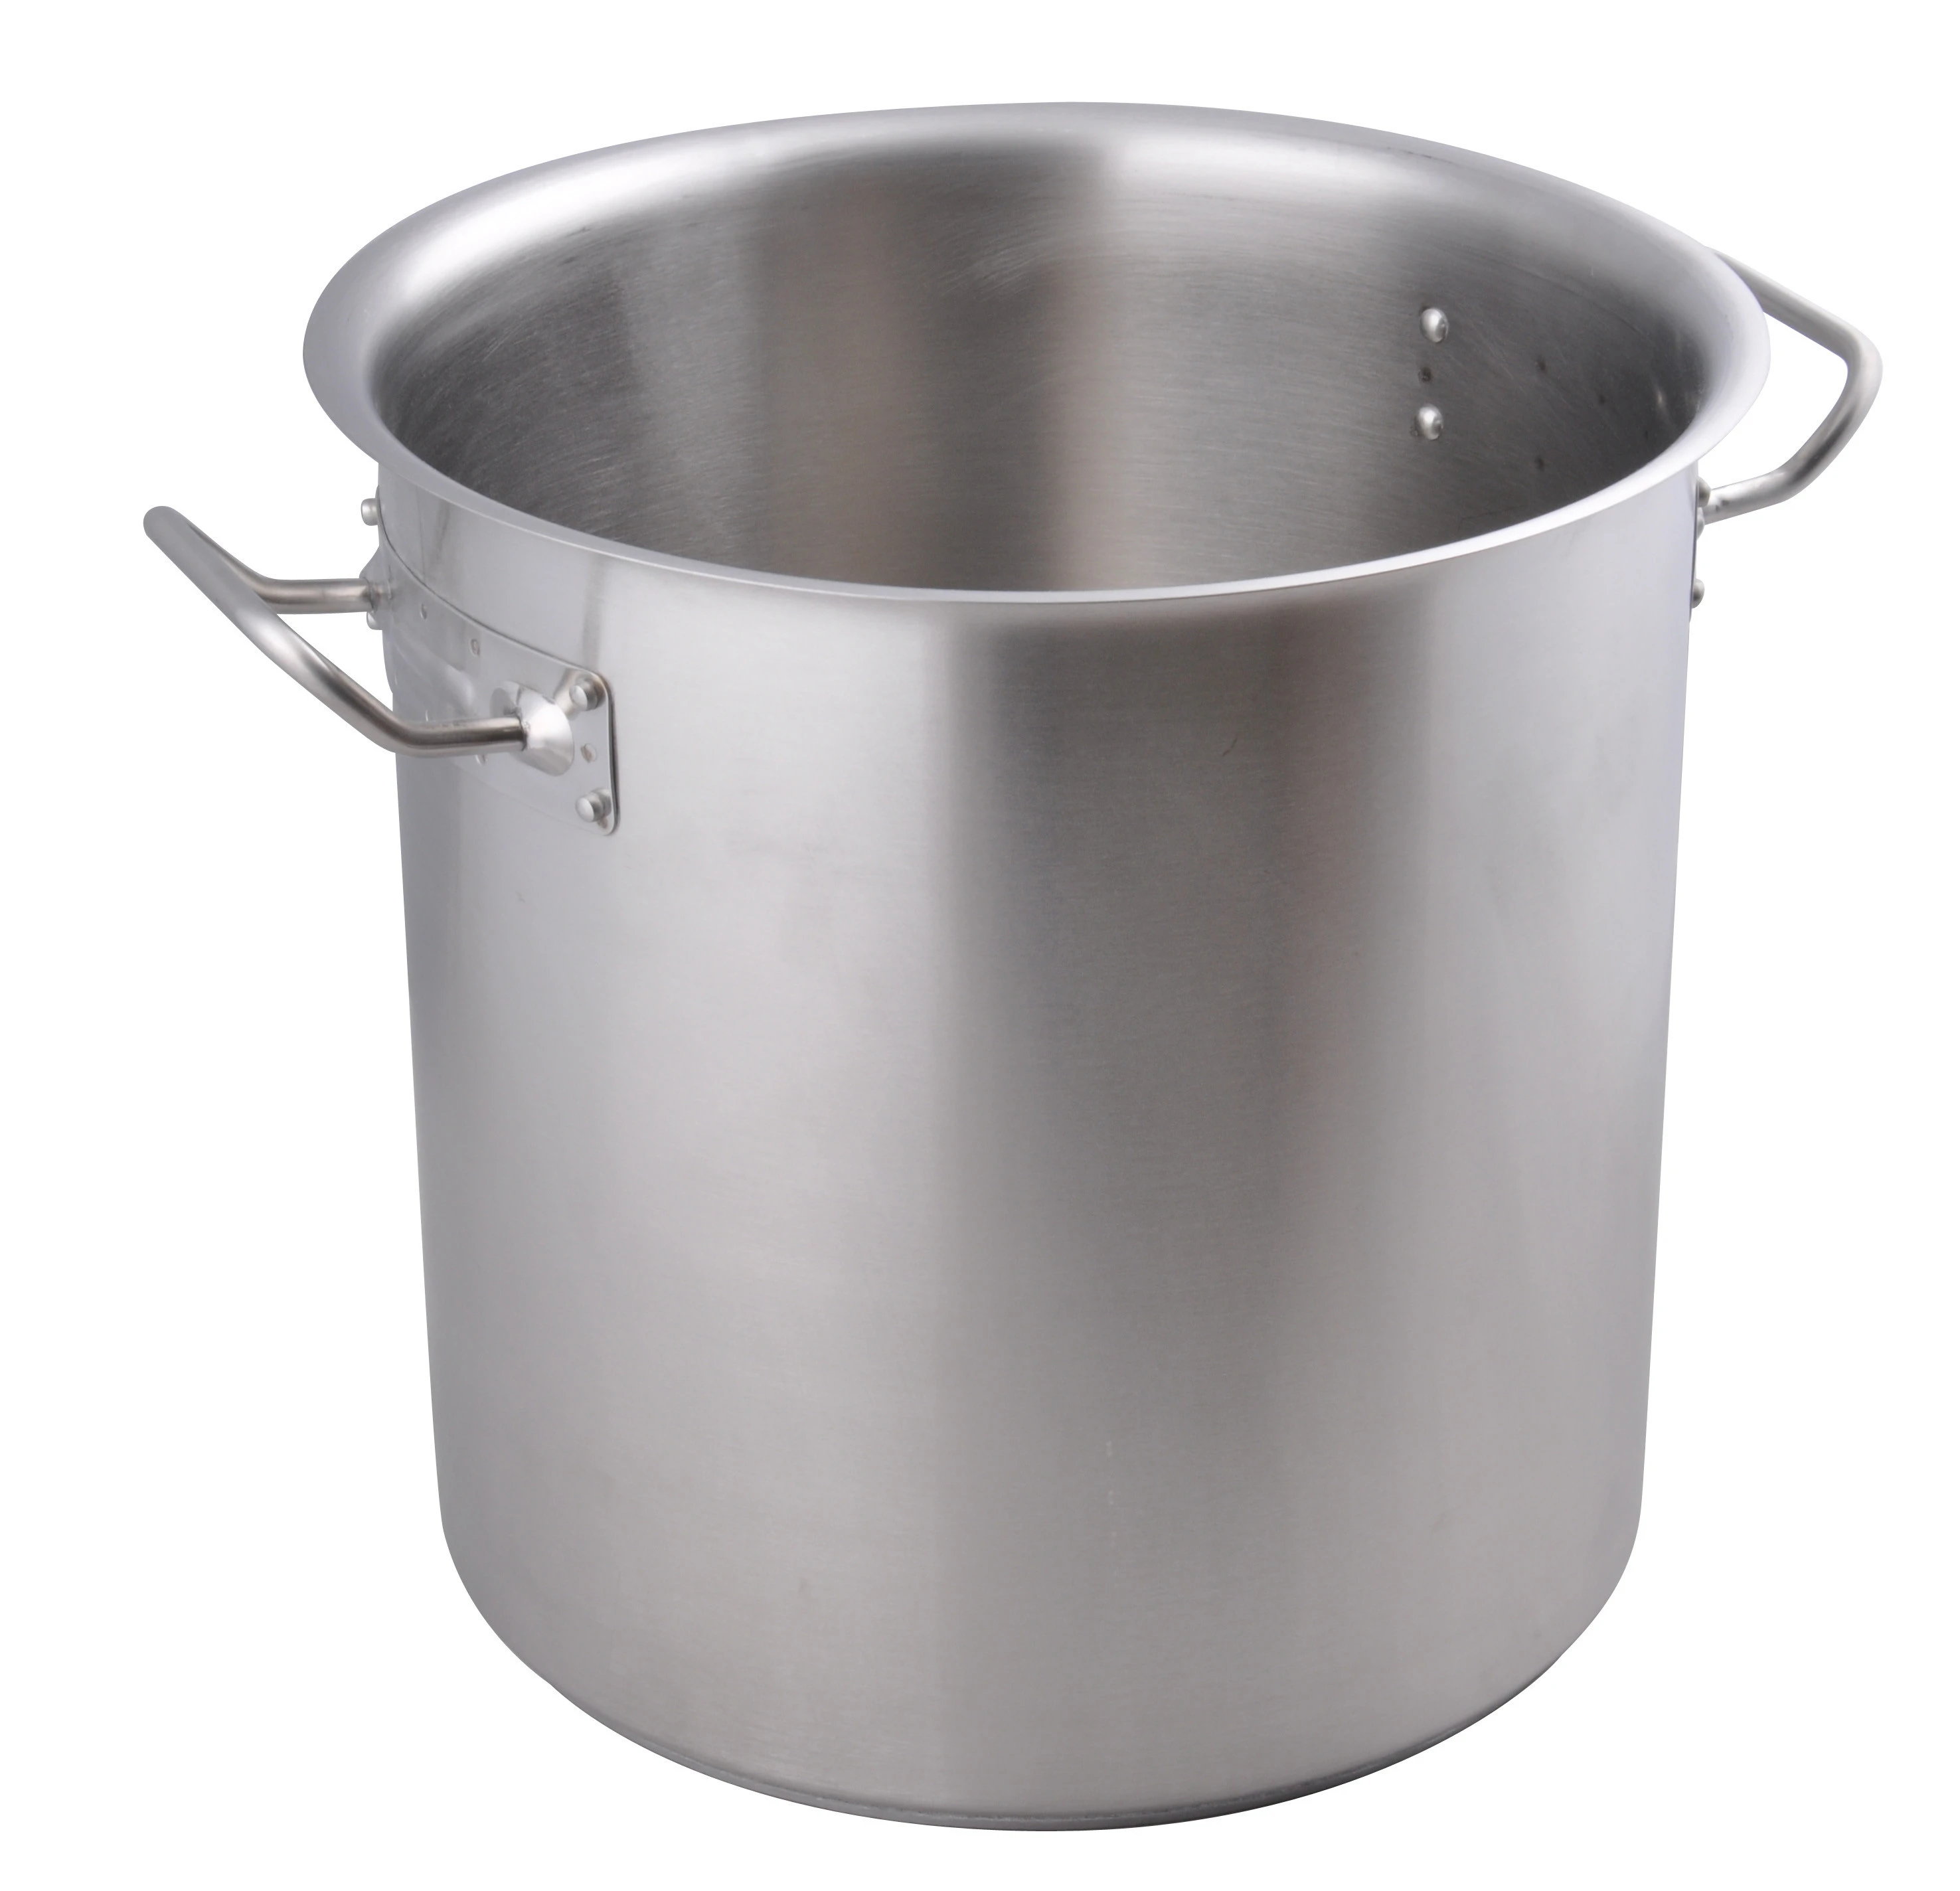 NSF listed 18 10 stainless steel stock pot kitchen cookware set for restaurant